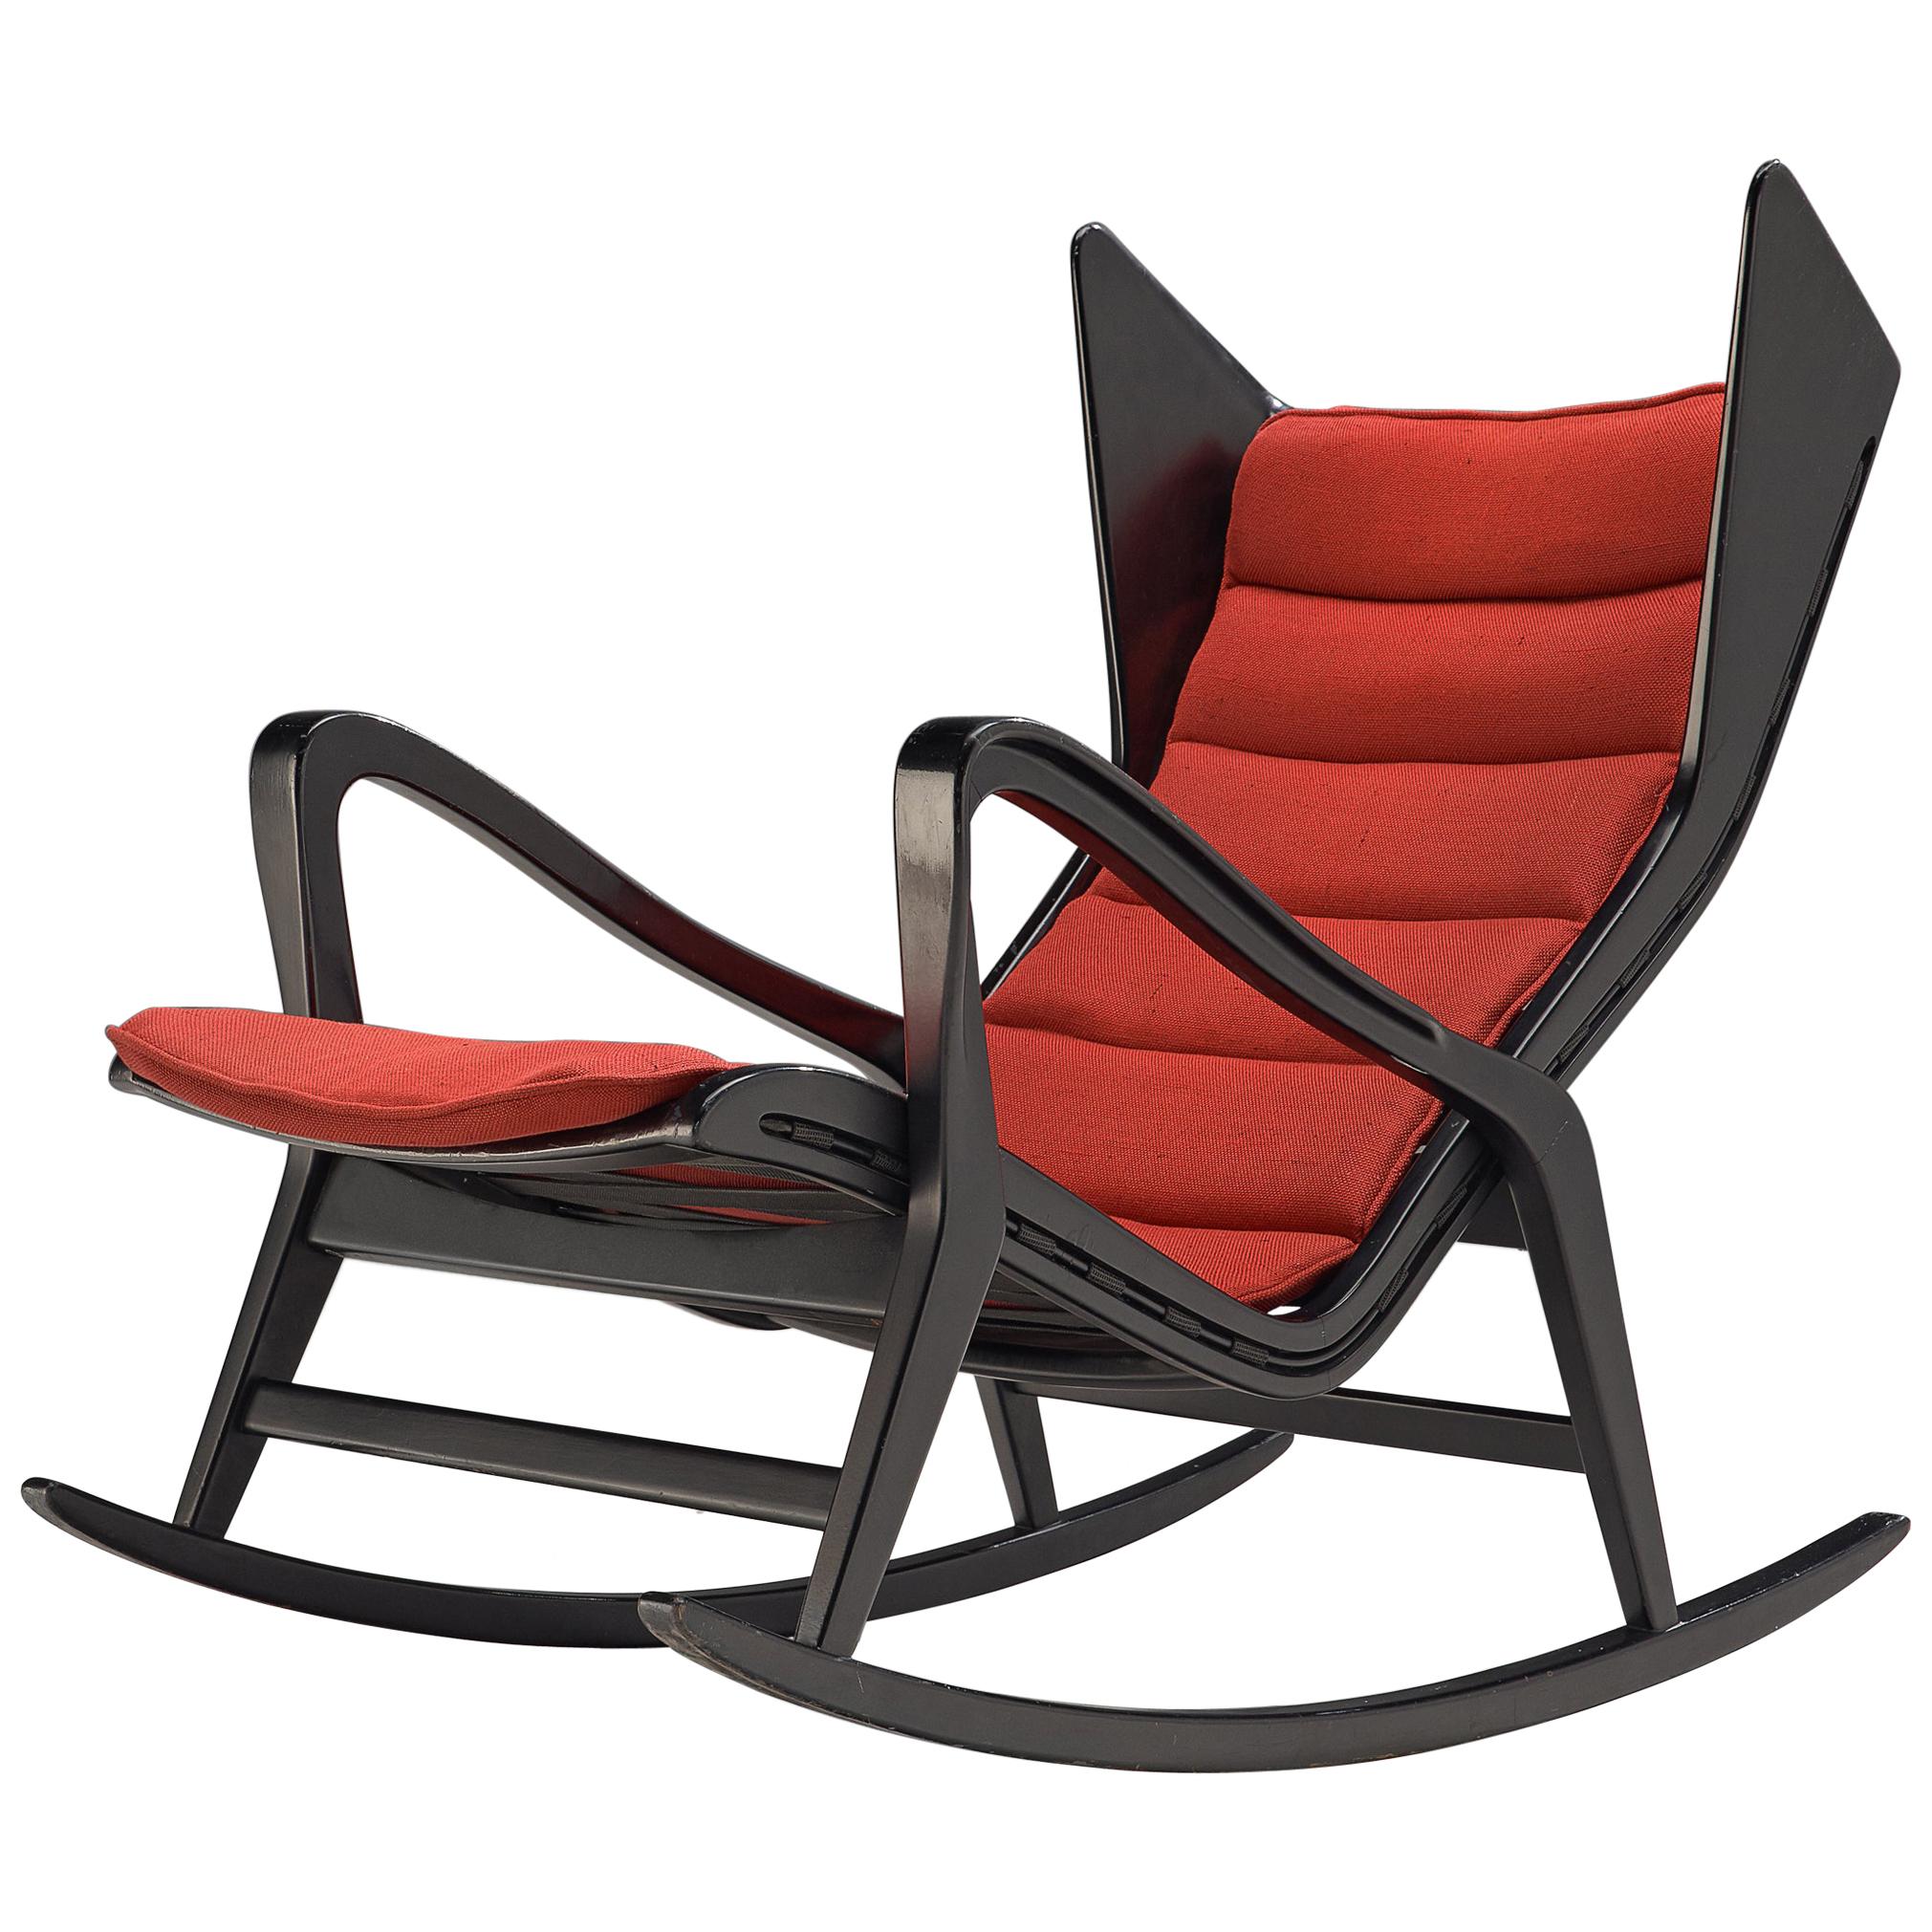 Studio Cassina '572 Rocking' Chair in Ebonized Wood and Red Fabric